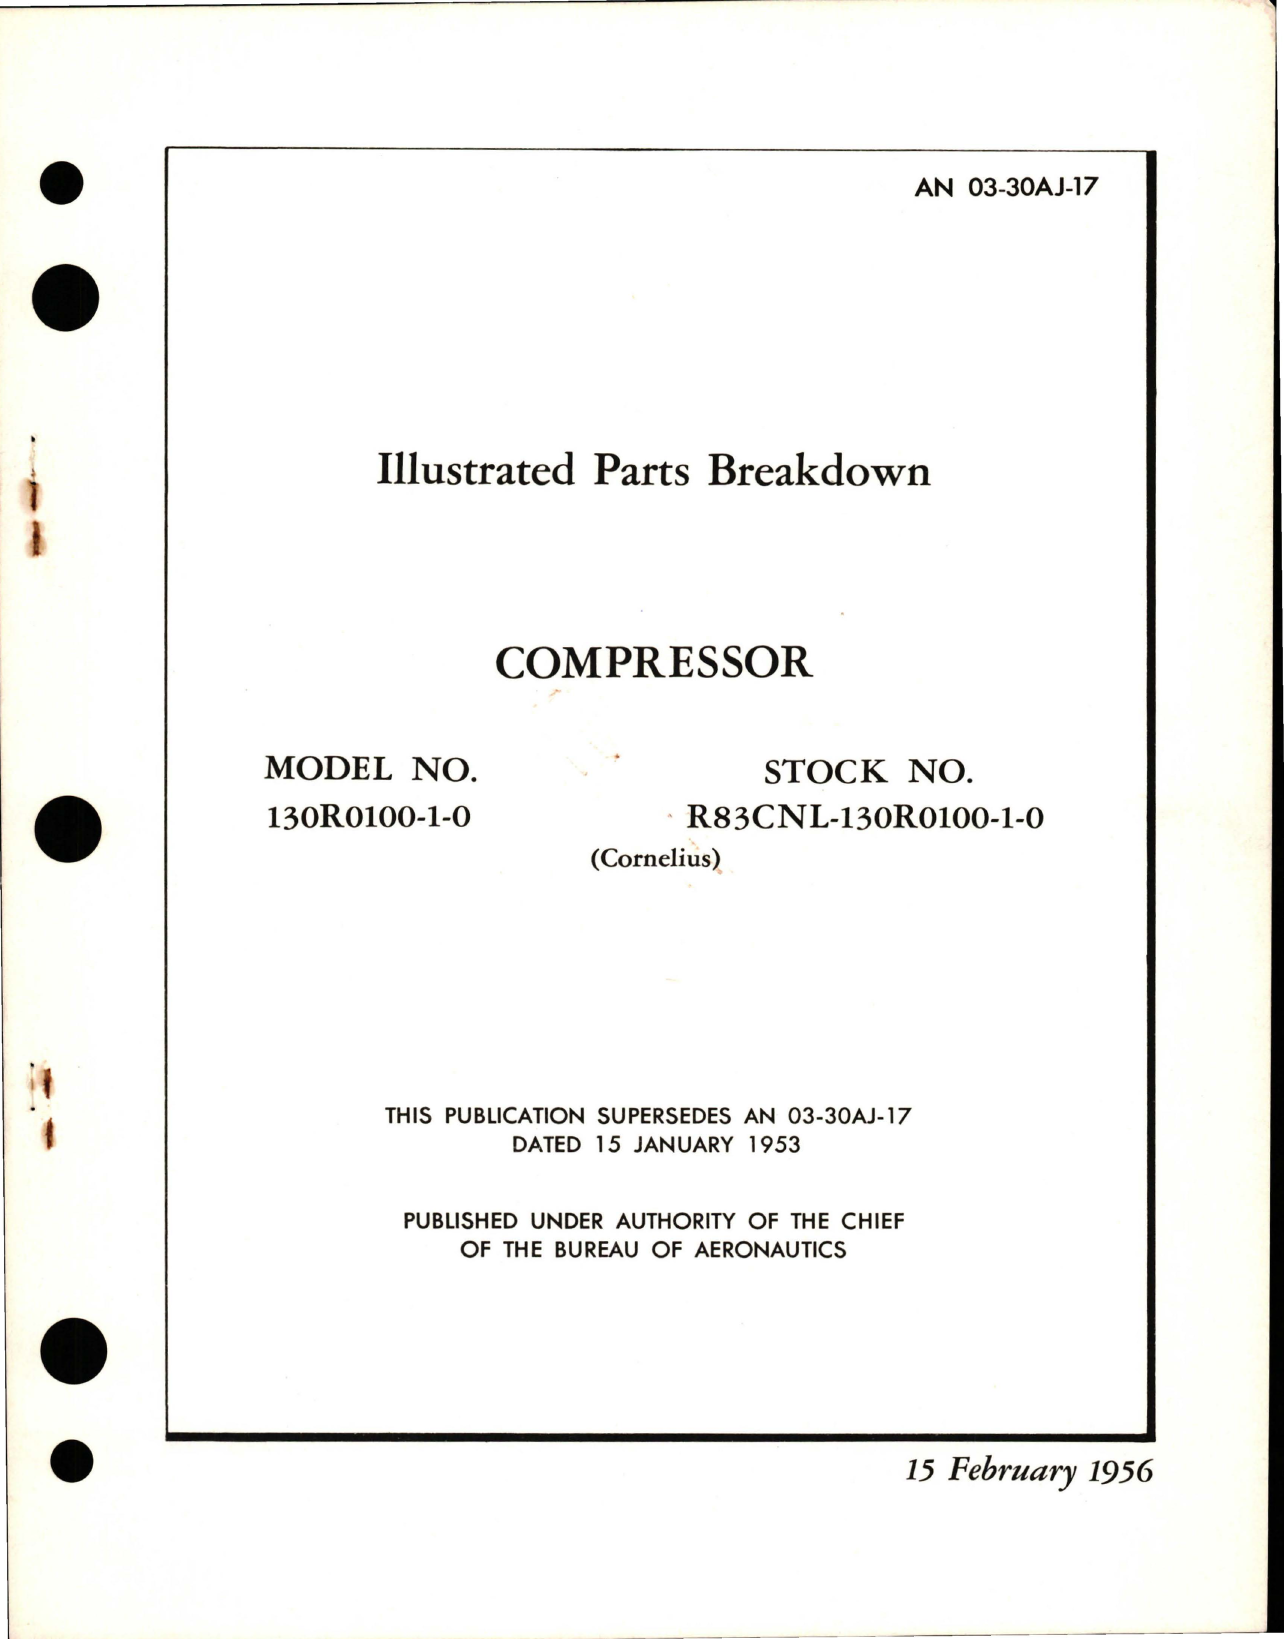 Sample page 1 from AirCorps Library document: Illustrated Parts Breakdown for Compressor - Model 130R0100-1-0